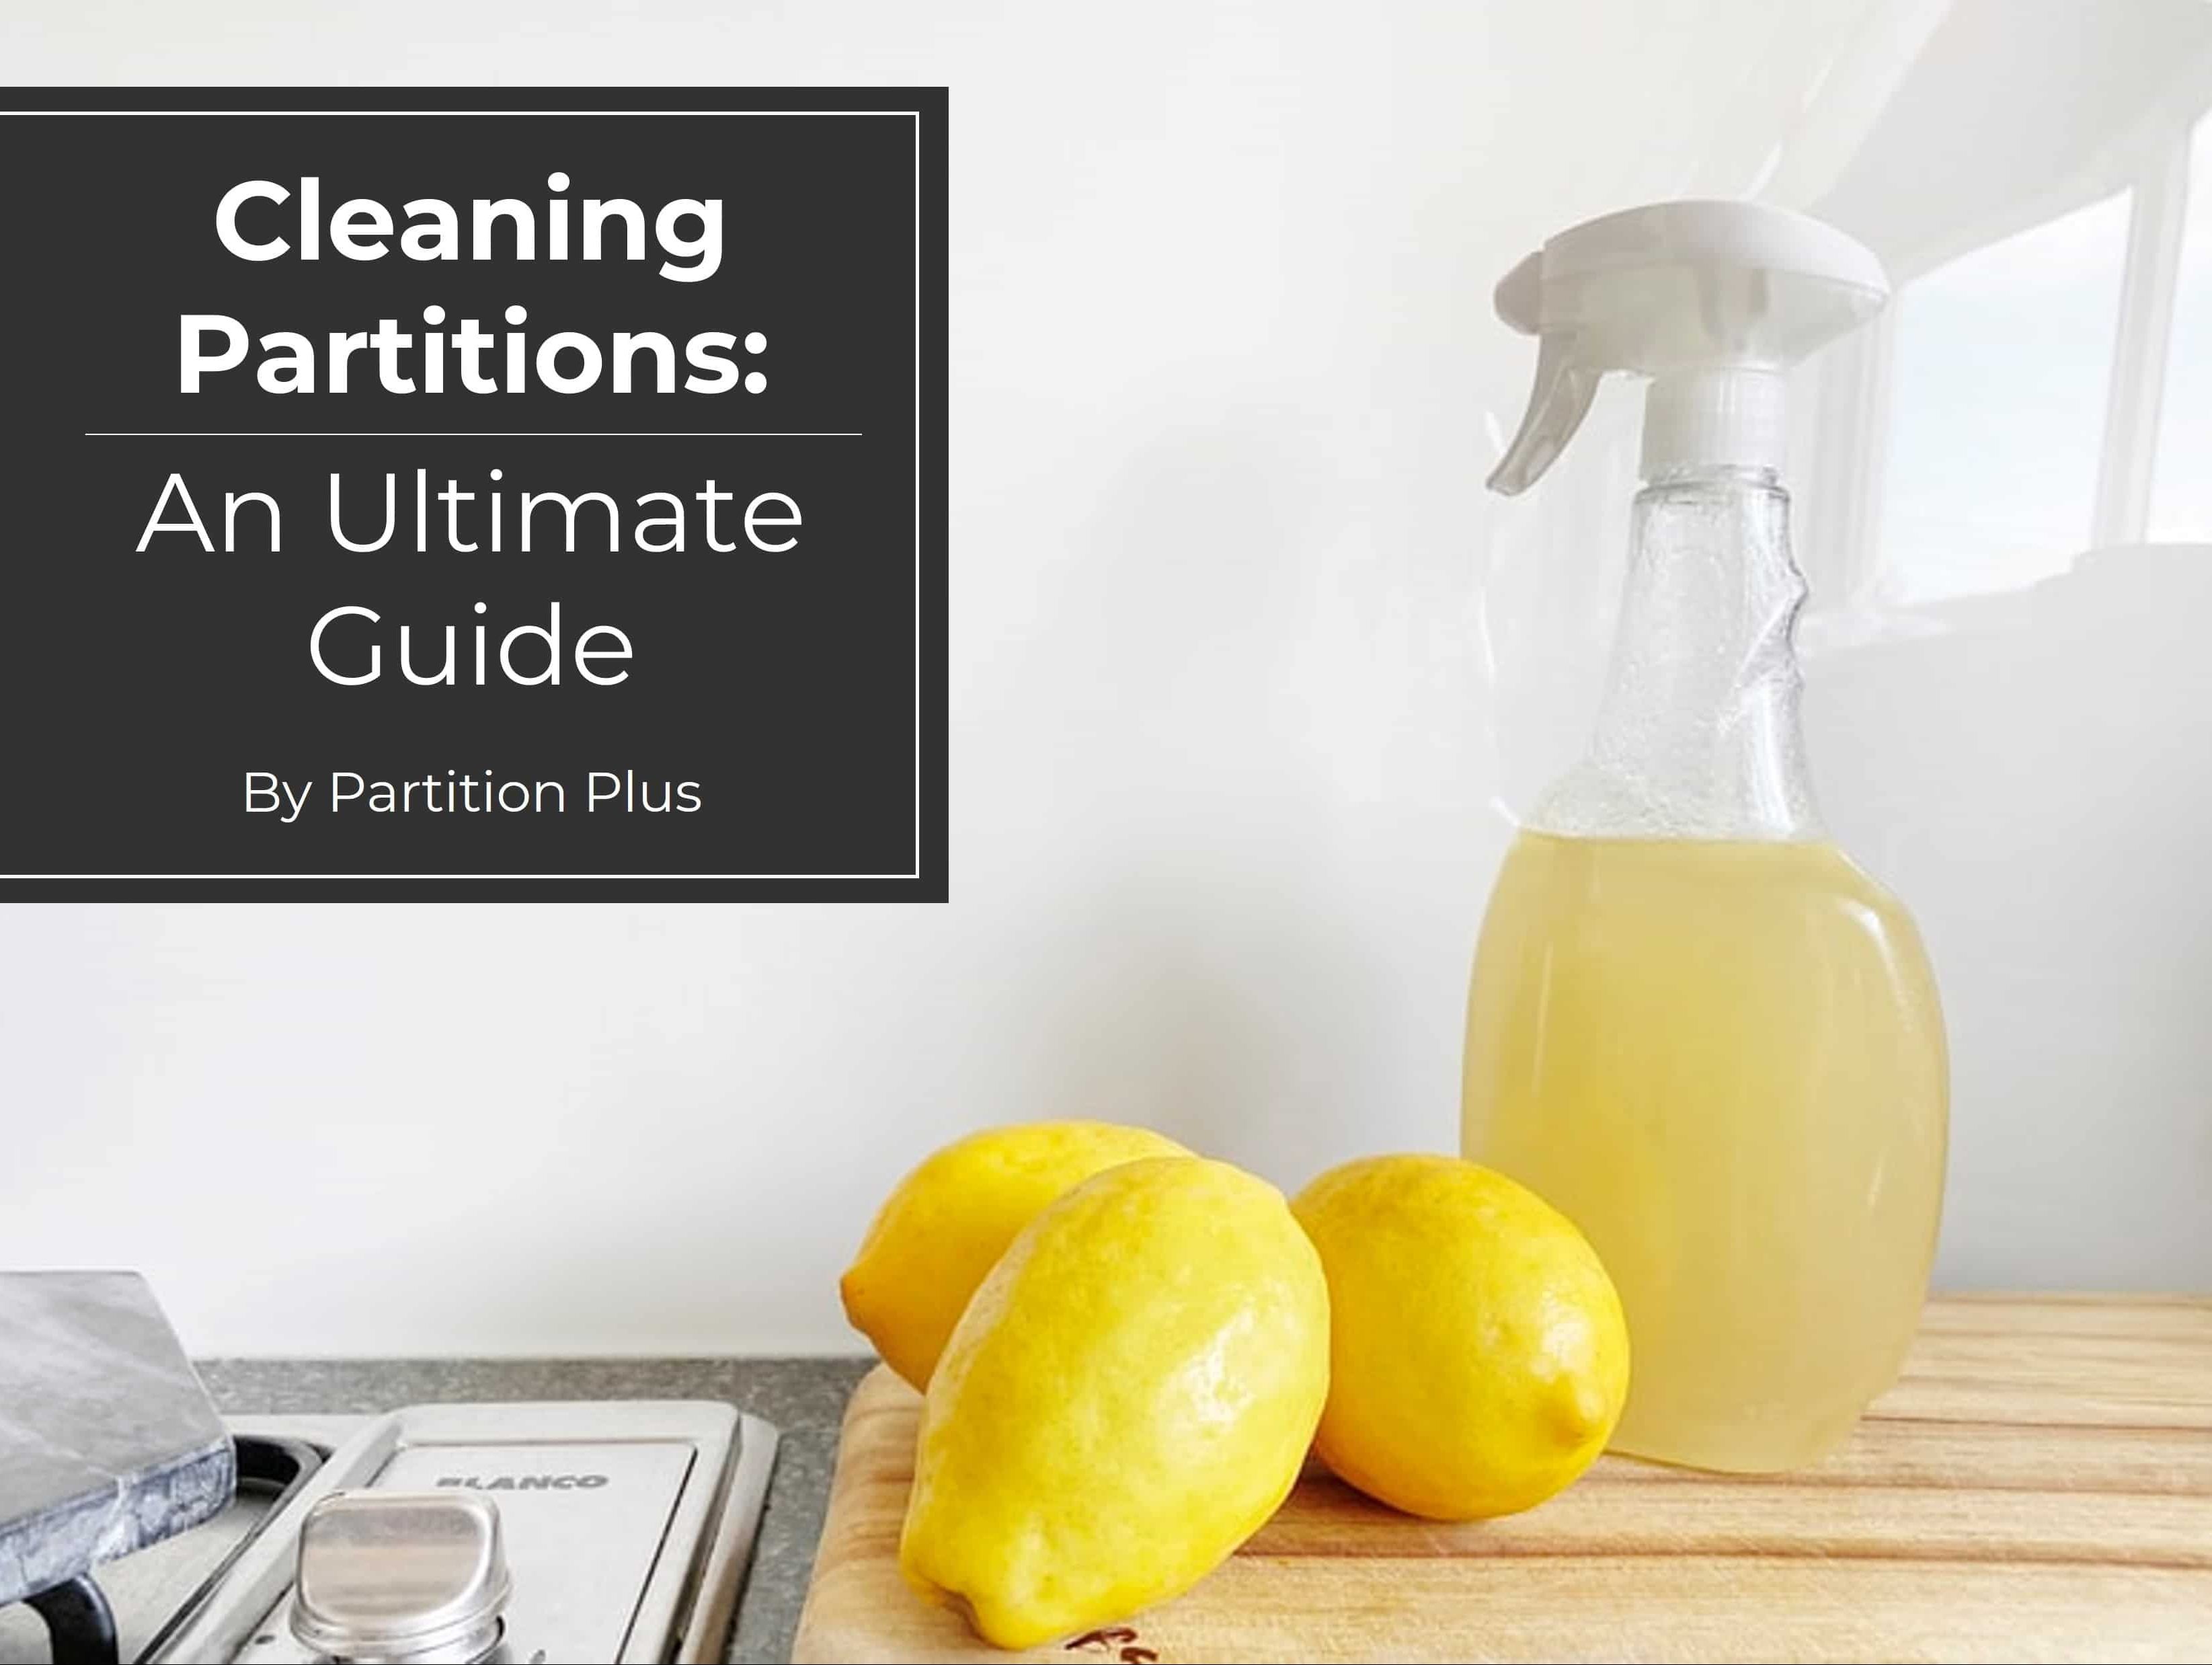 Cleaning Partitions: An Ultimate Guide